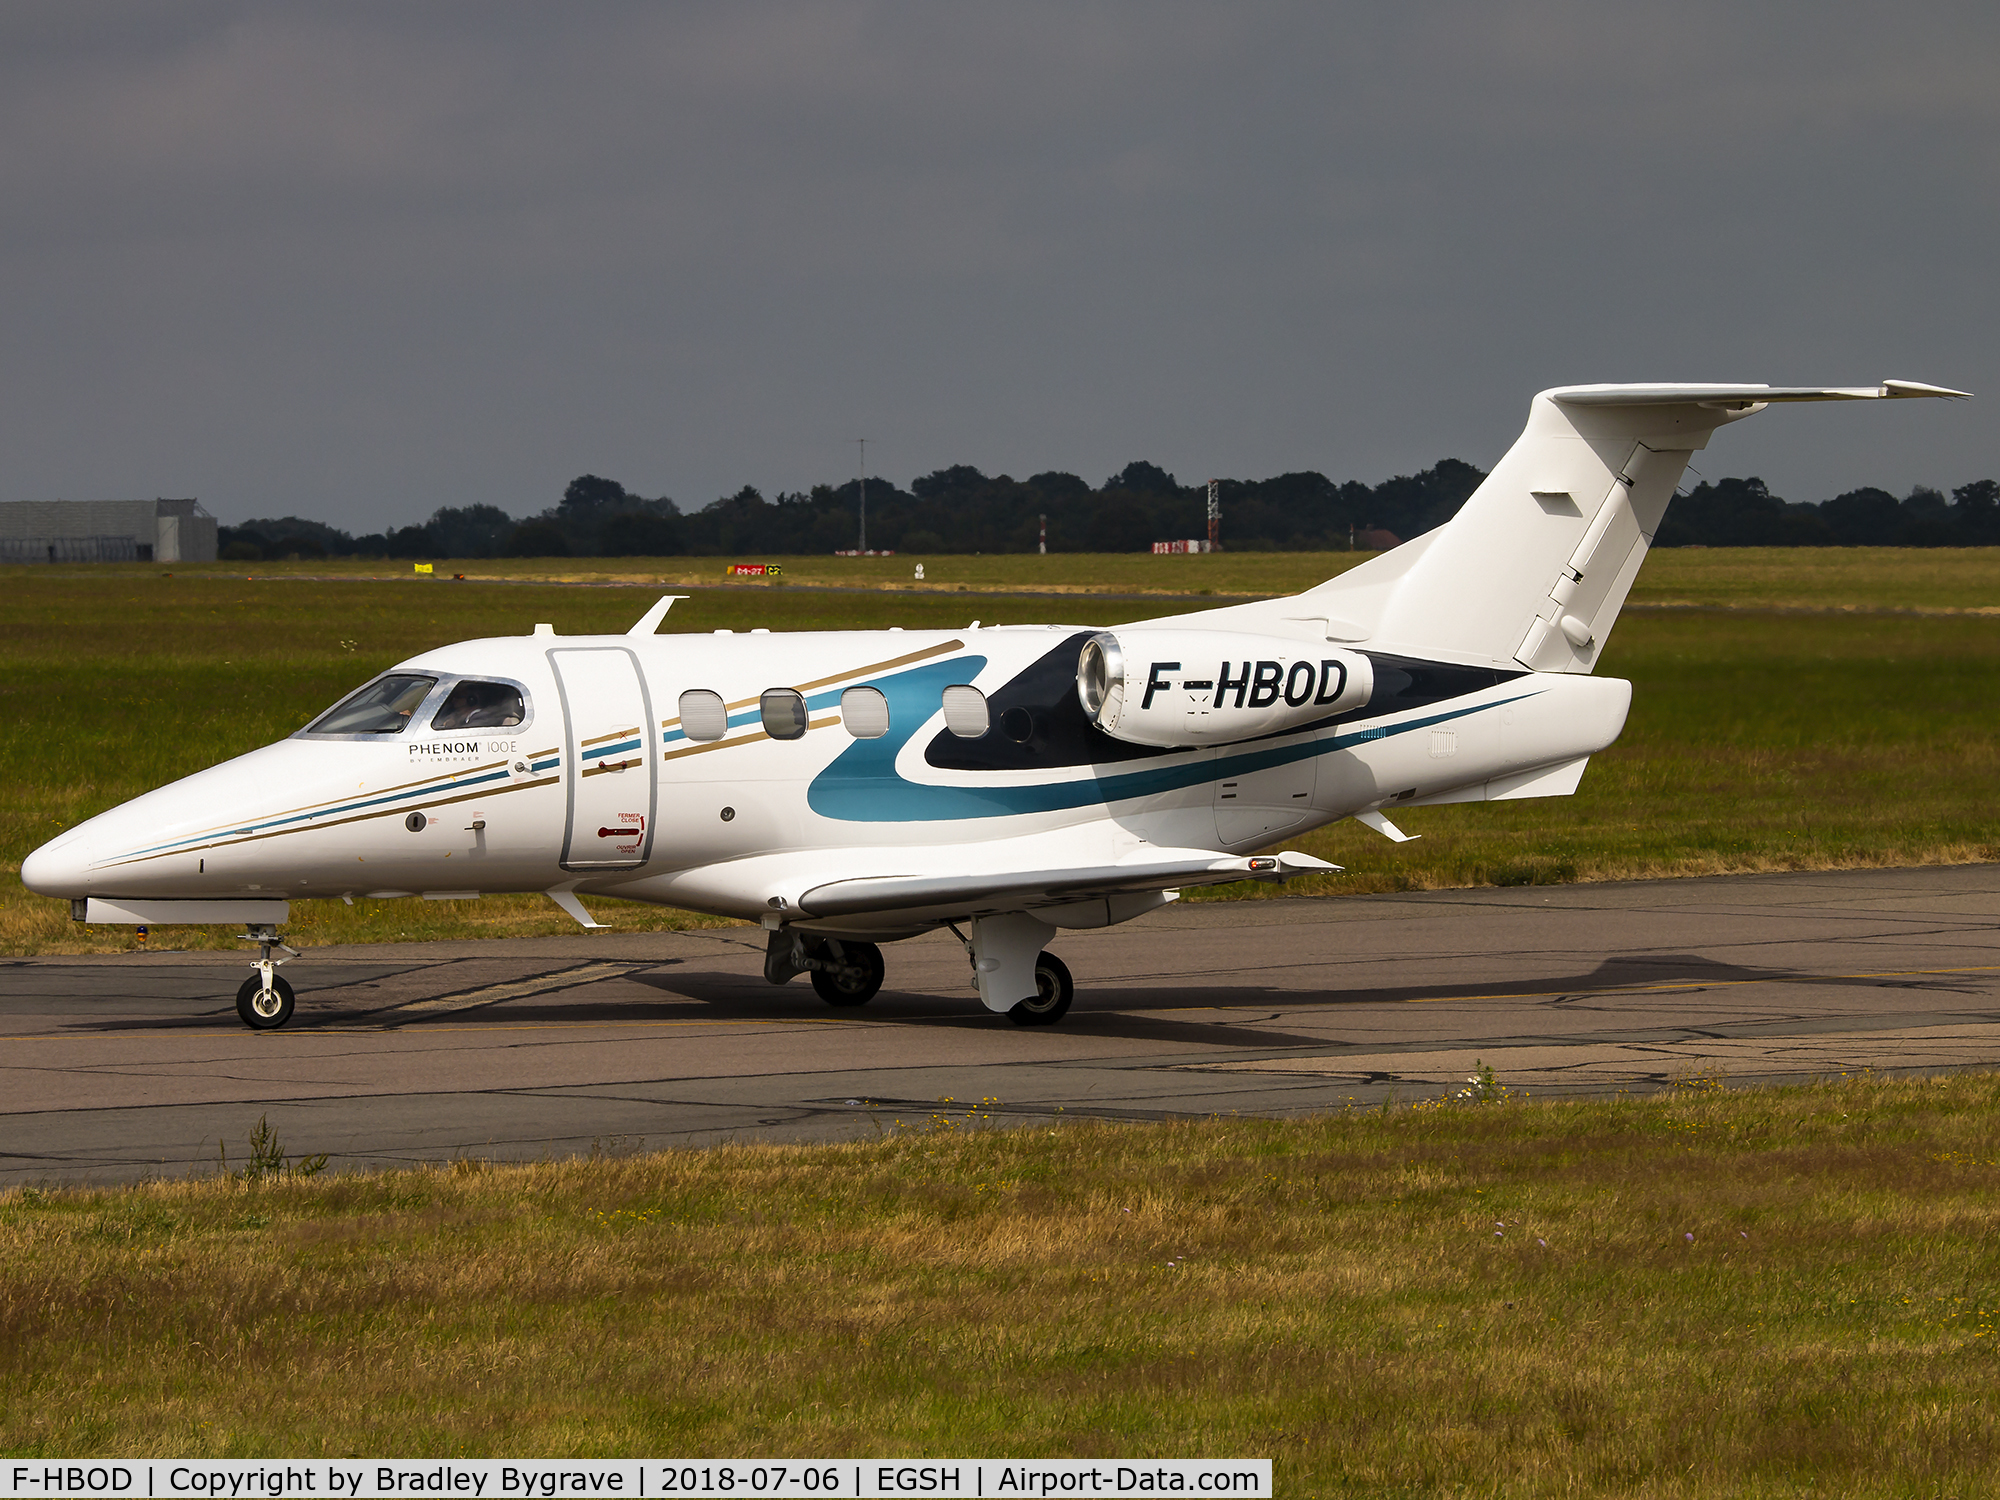 F-HBOD, 2017 Embraer EMB-500 Phenom 100 C/N 50000366, Taxiing